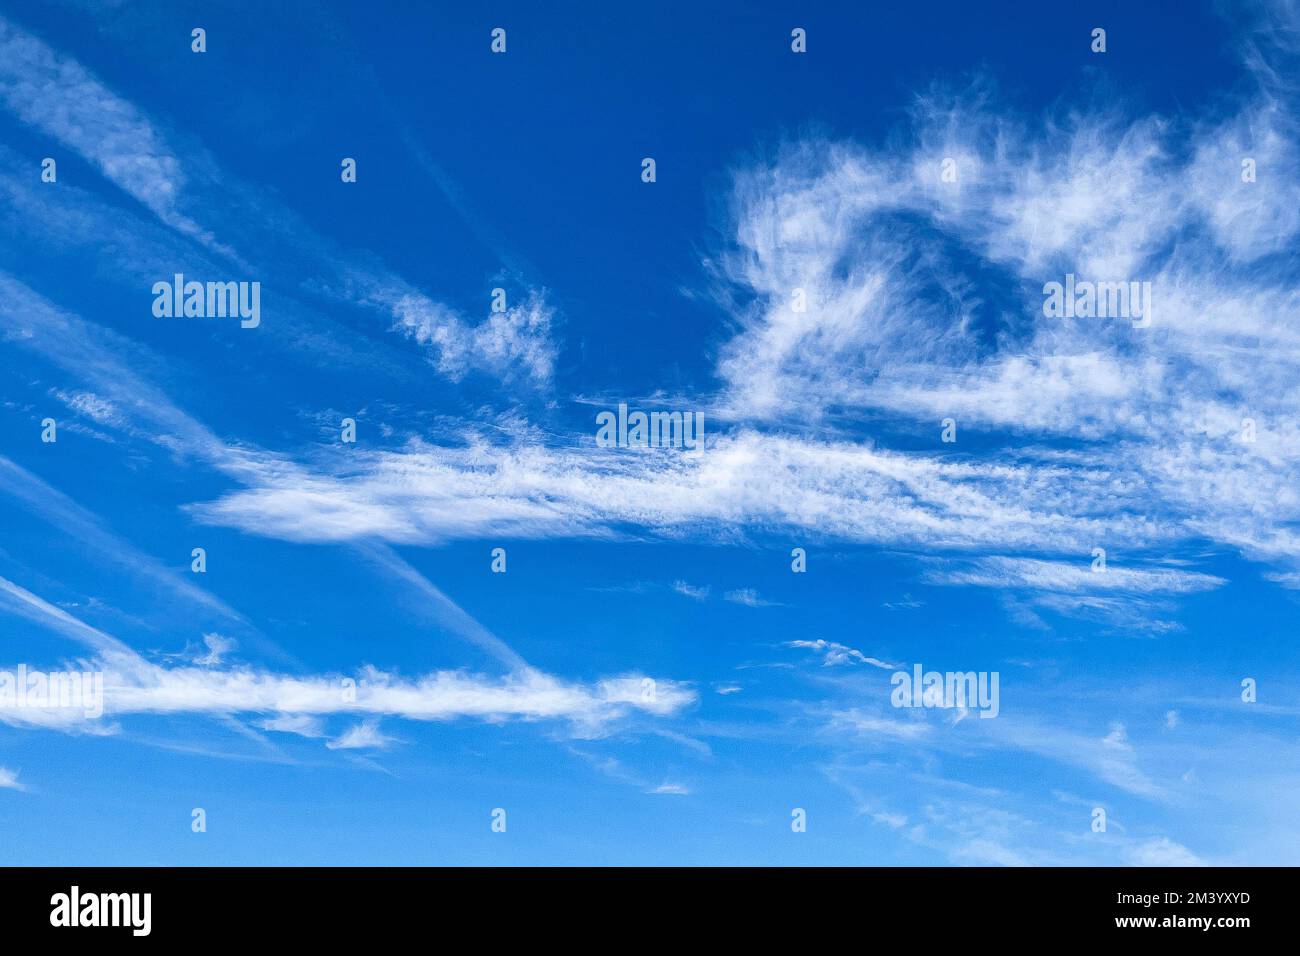 Blue sky with Cirrus feather clouds on the left Cirrocumulus cluster clouds on the right, small Altostratus medium-high stratus clouds in the centre Stock Photo